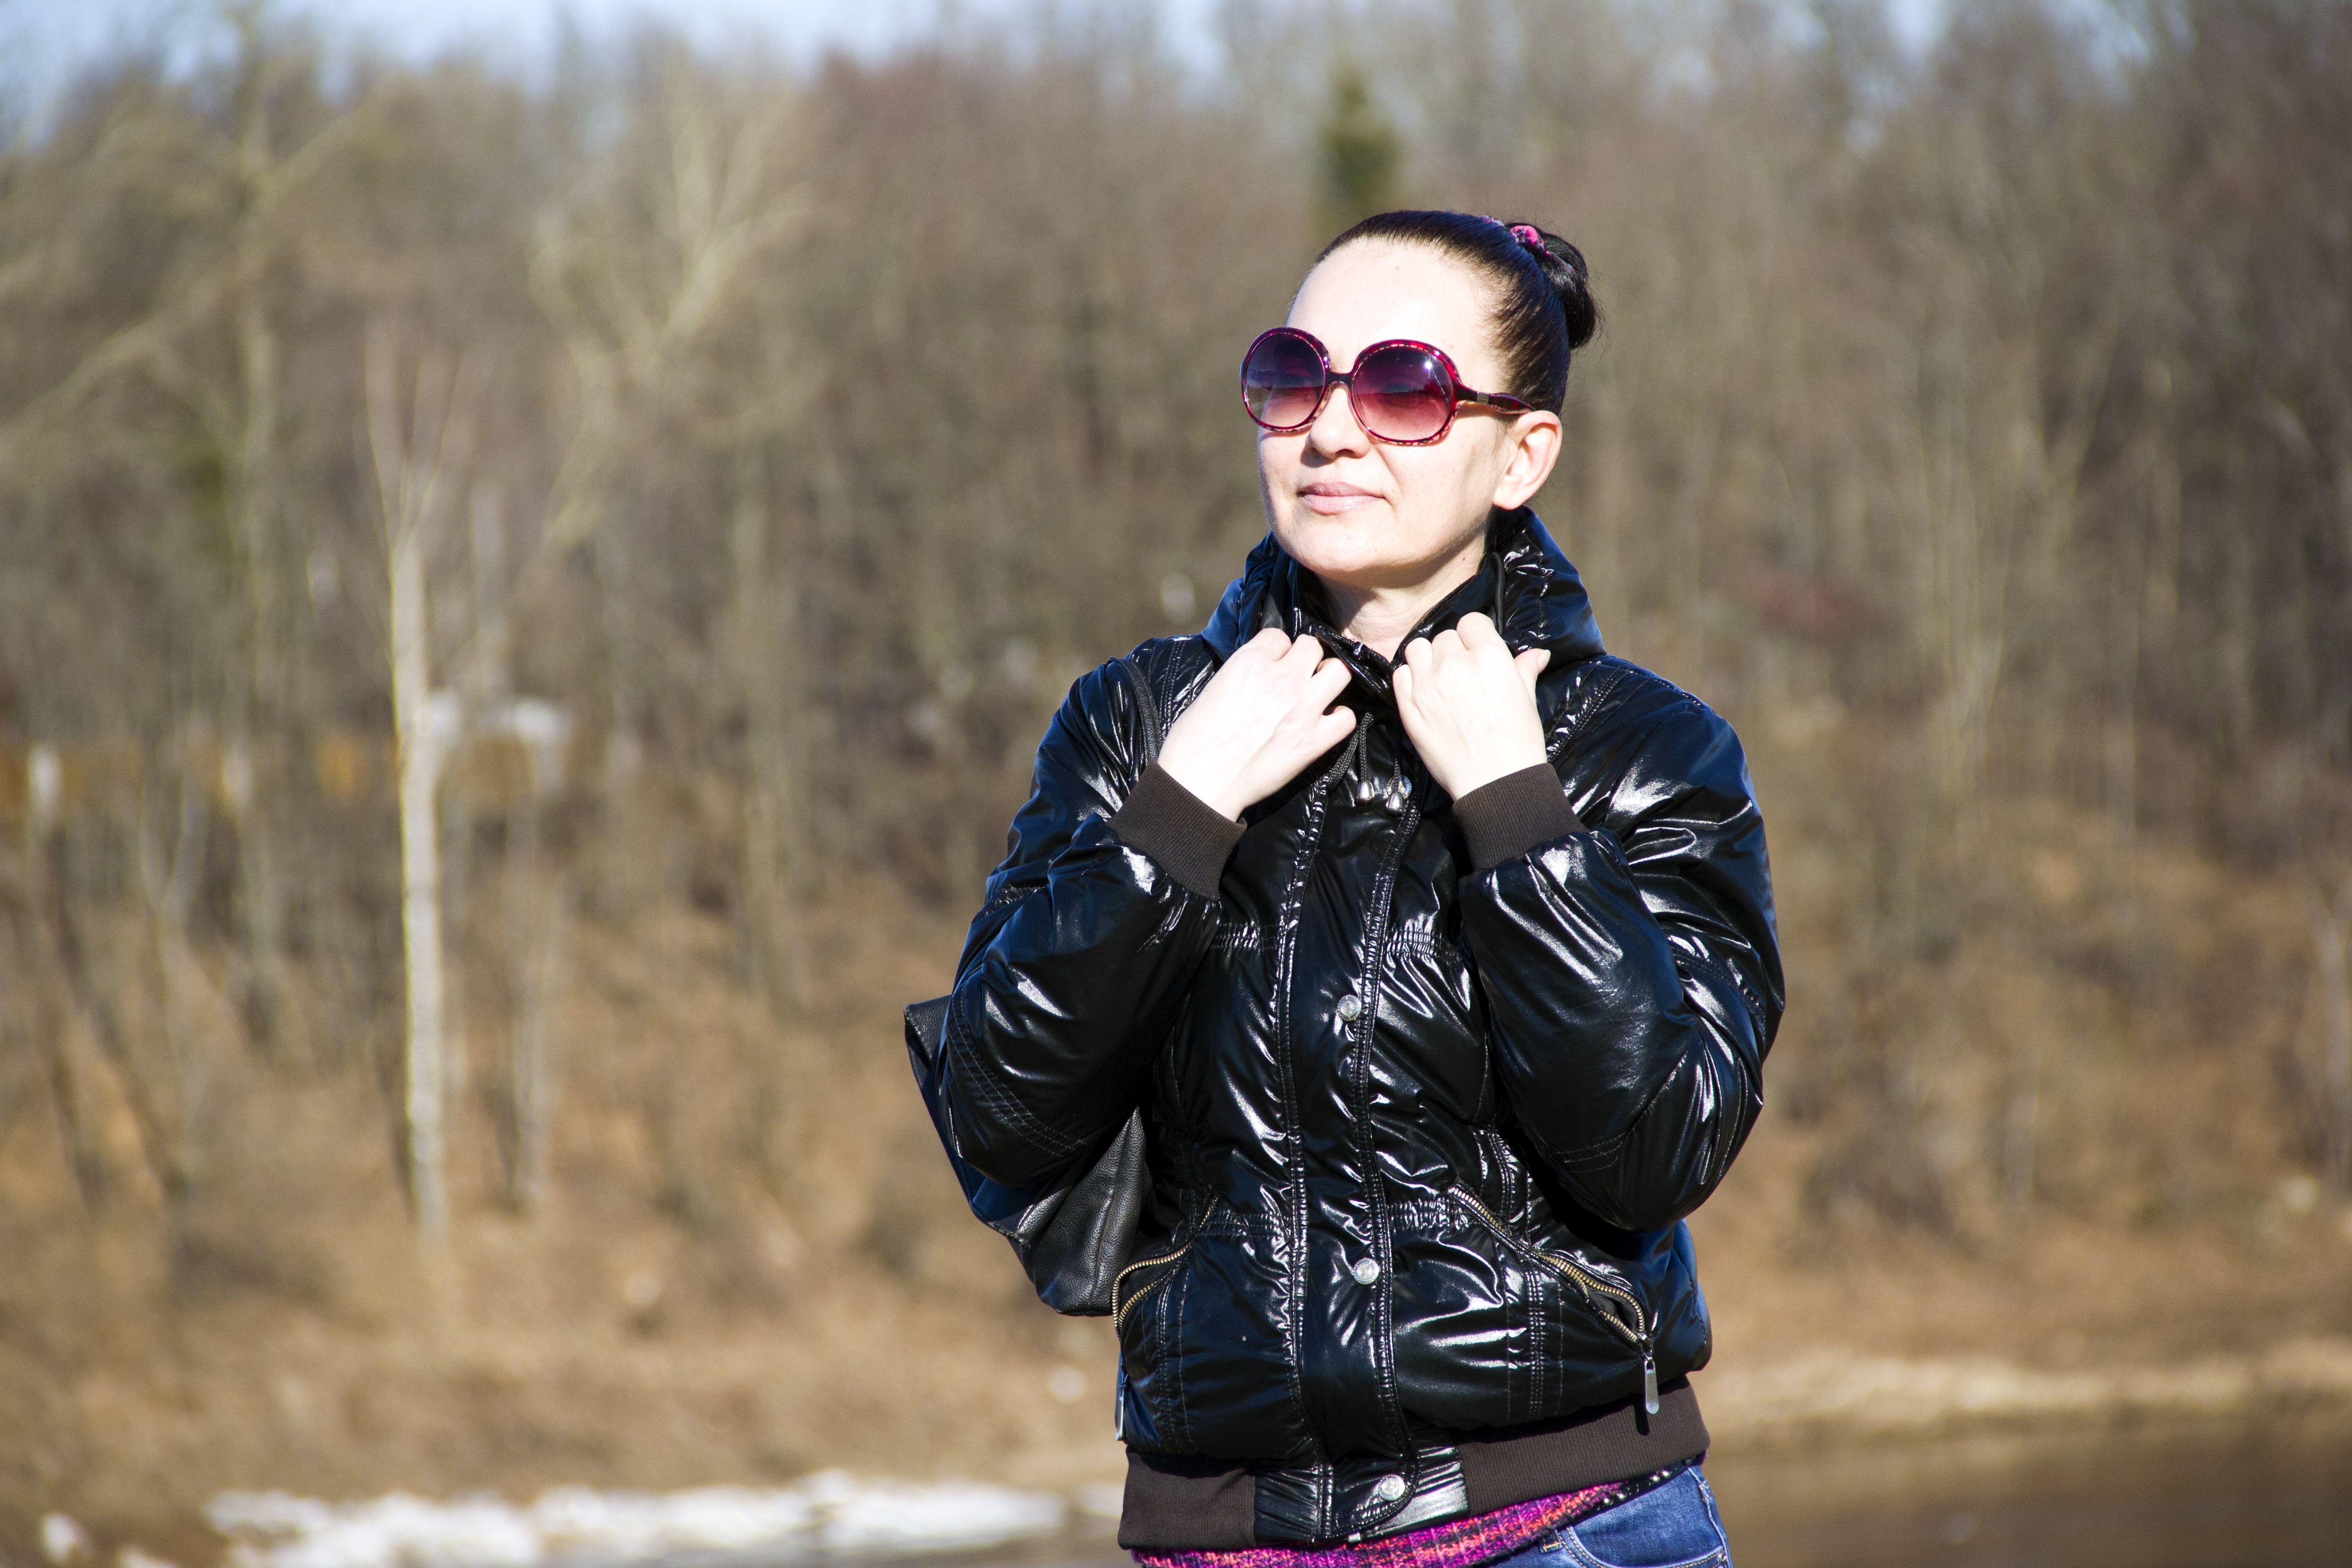 women's black leather jacket and blue jeans outfit